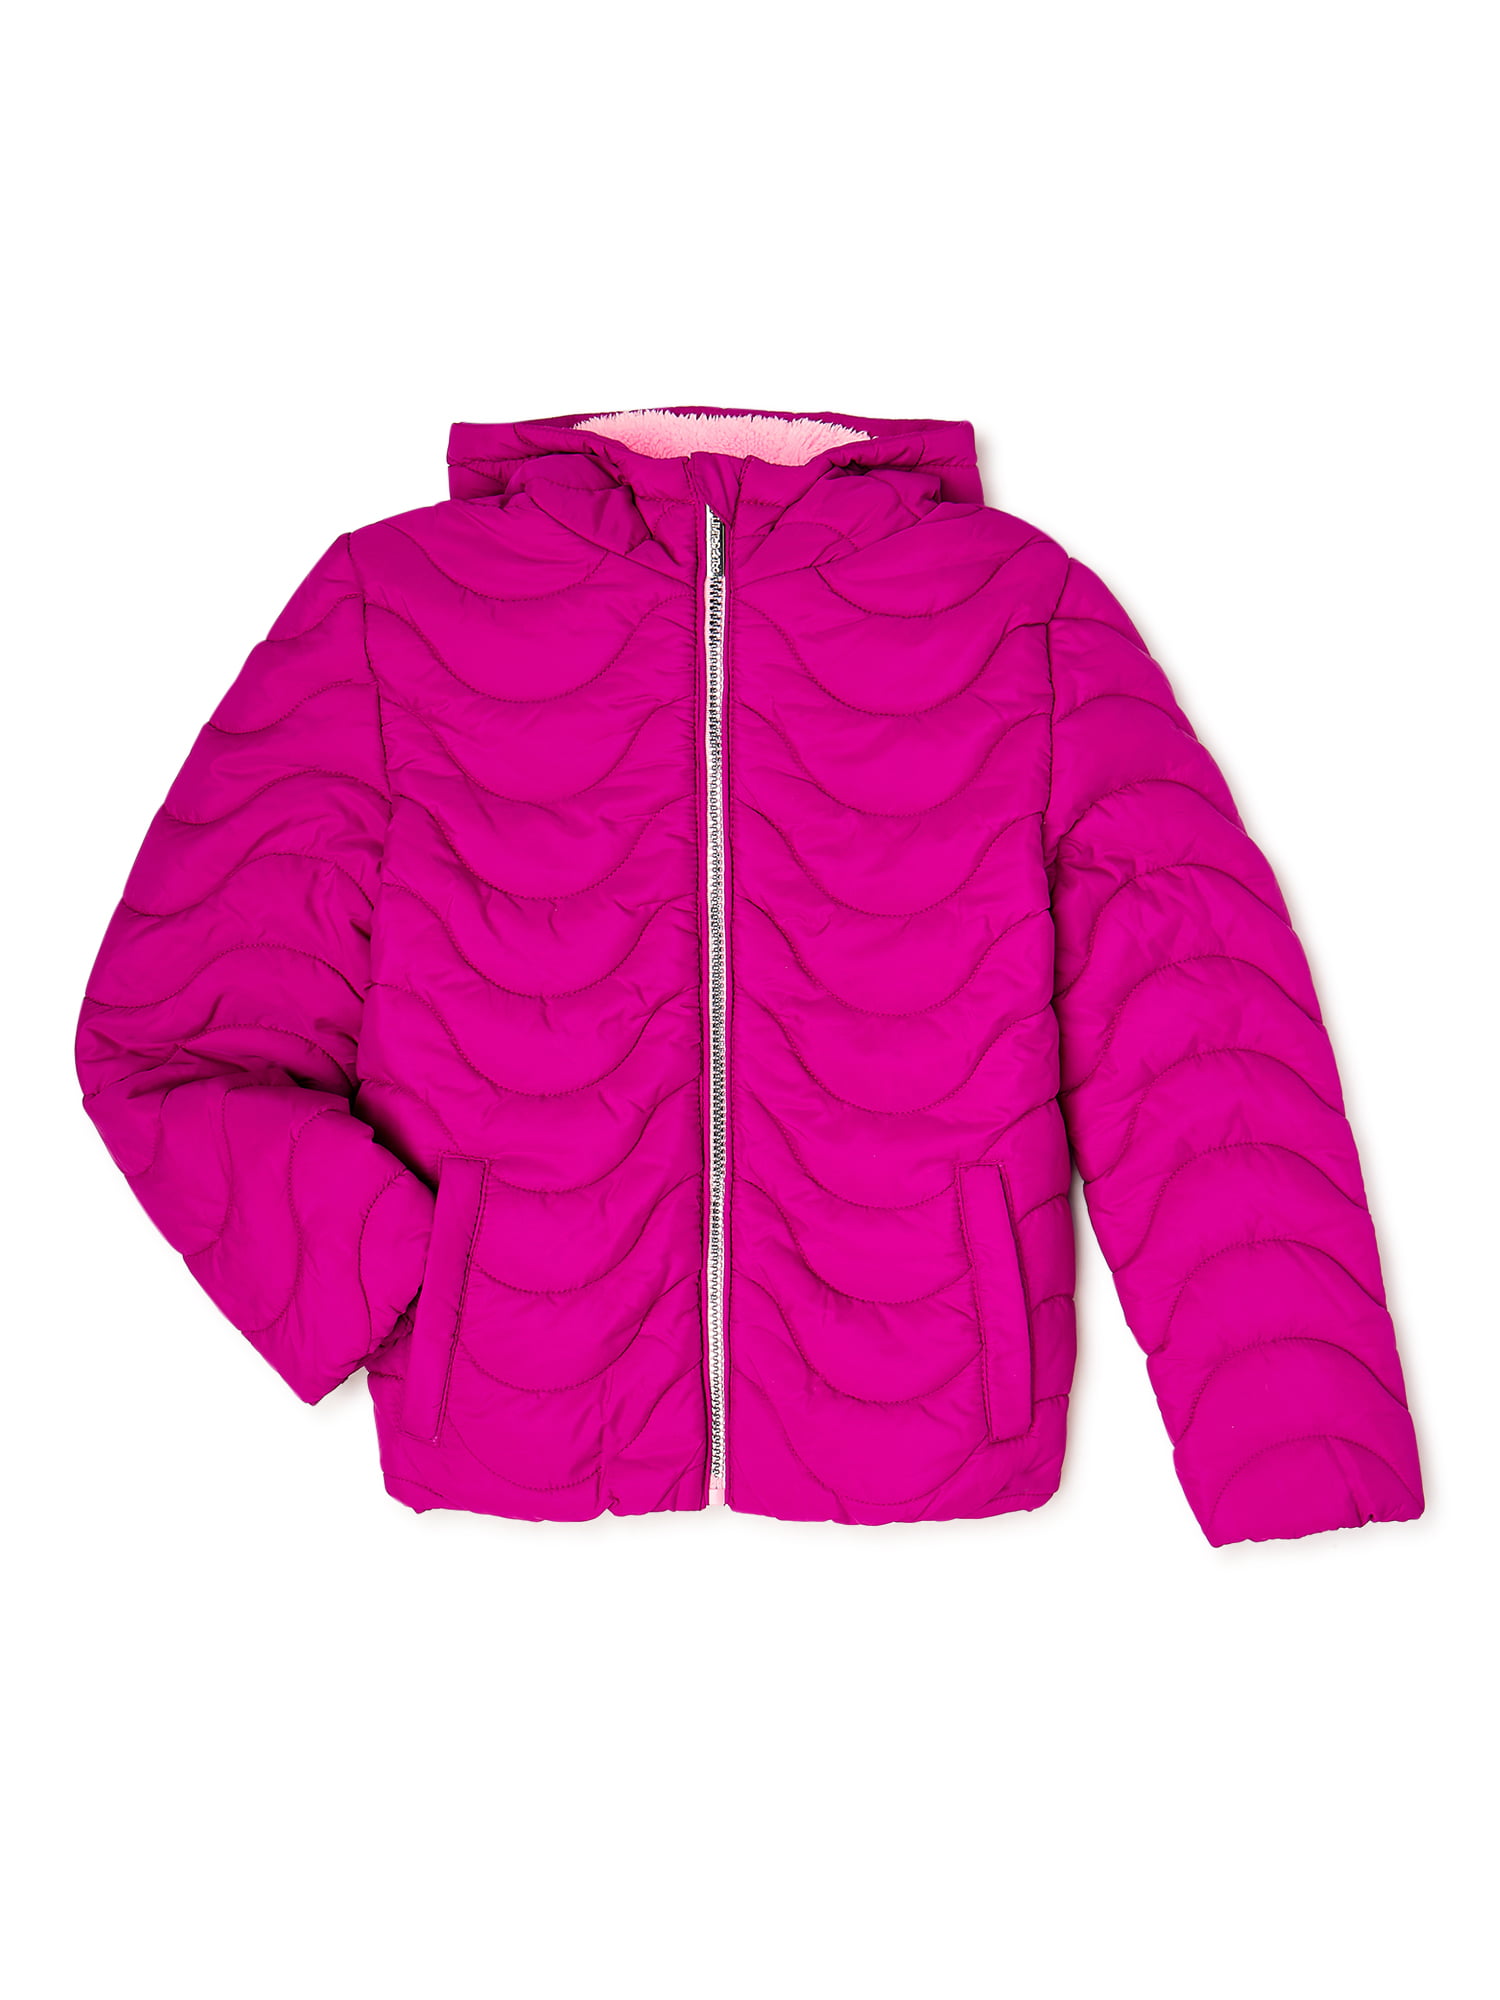 Limited Too Girls' Puffer Jacket